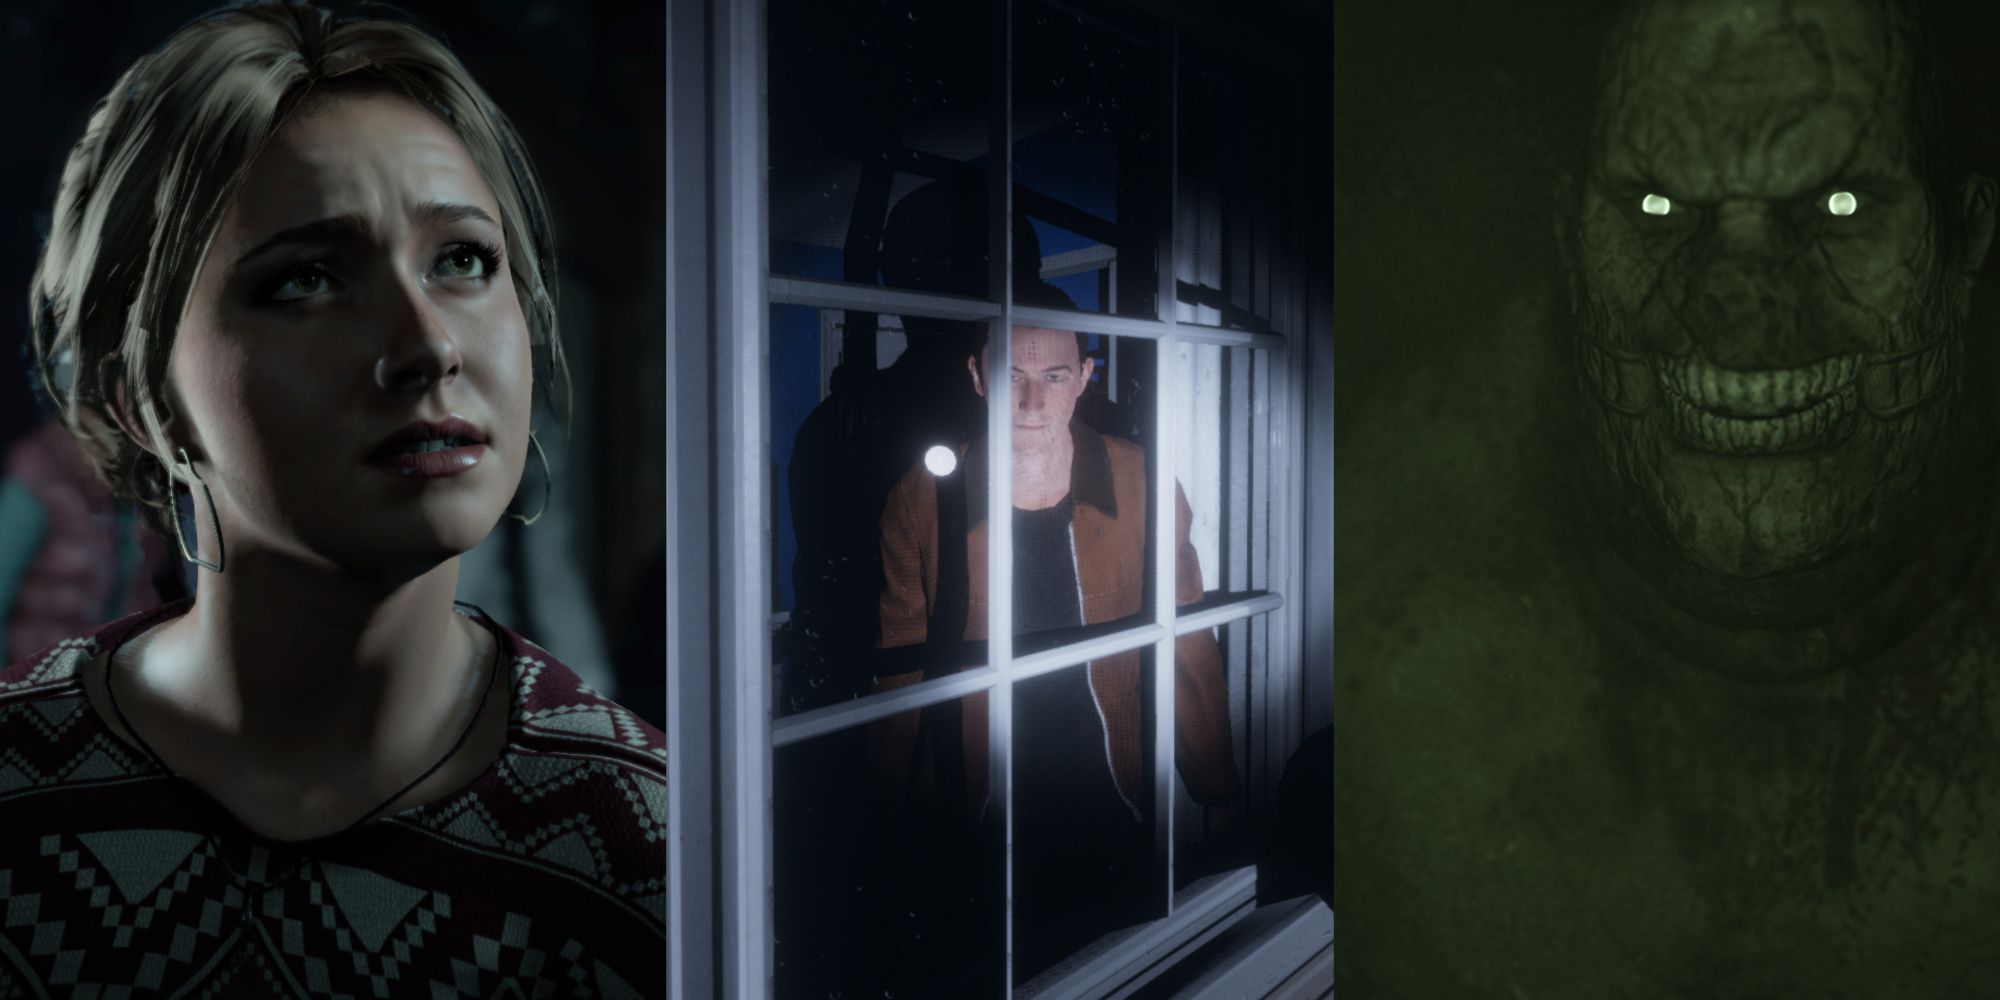 The best horror games to play in 2023